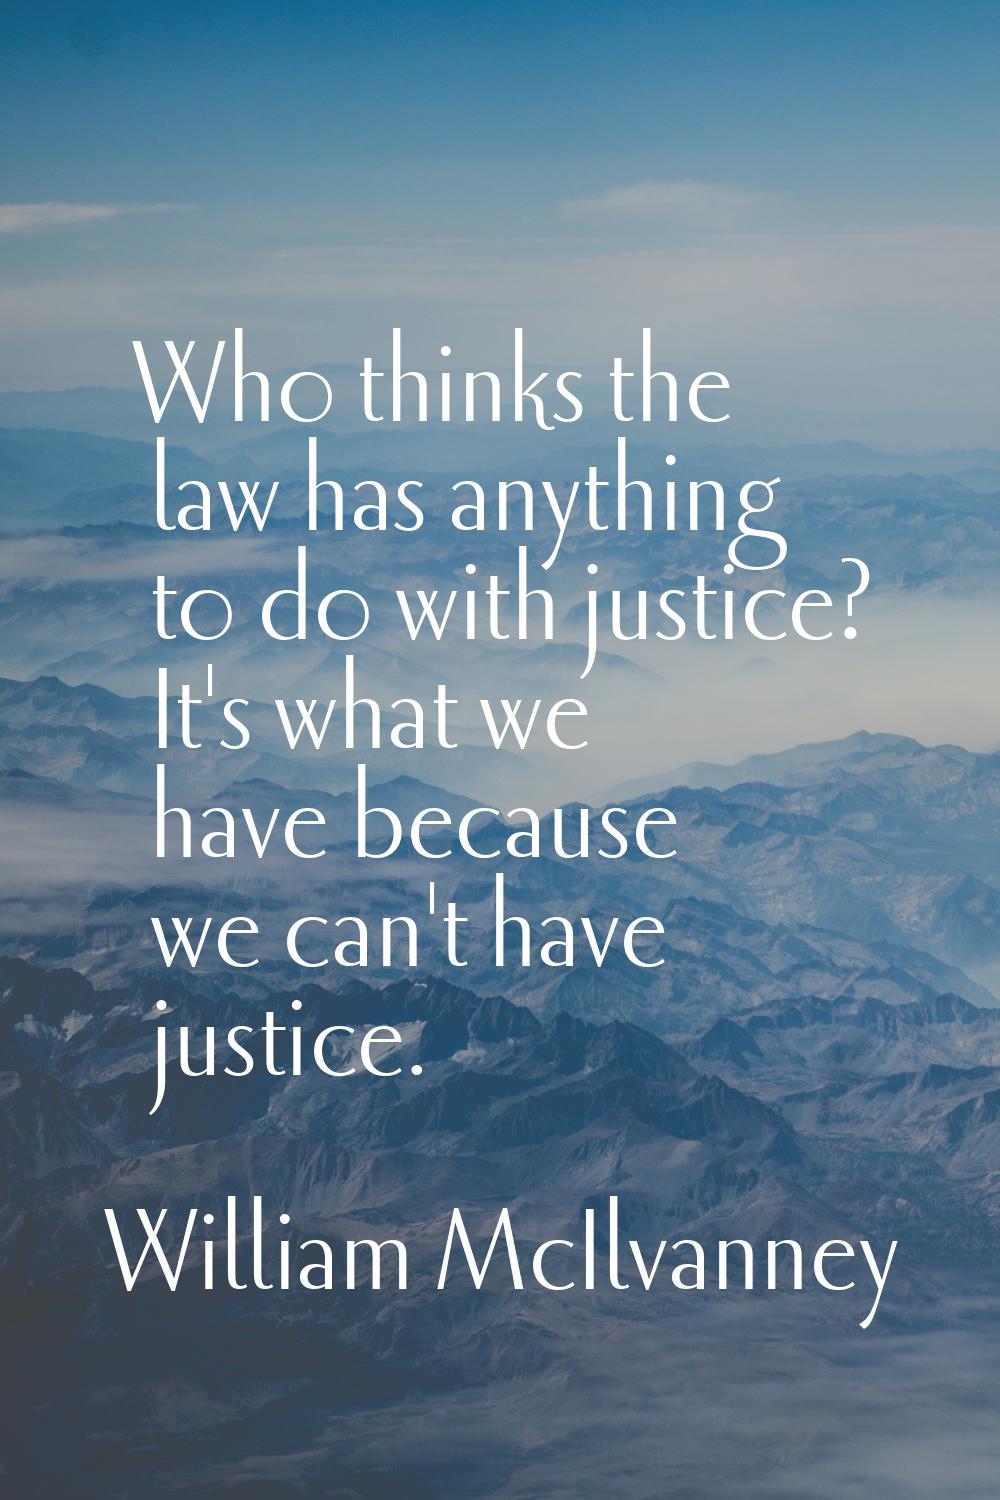 Who thinks the law has anything to do with justice? It's what we have because we can't have justice